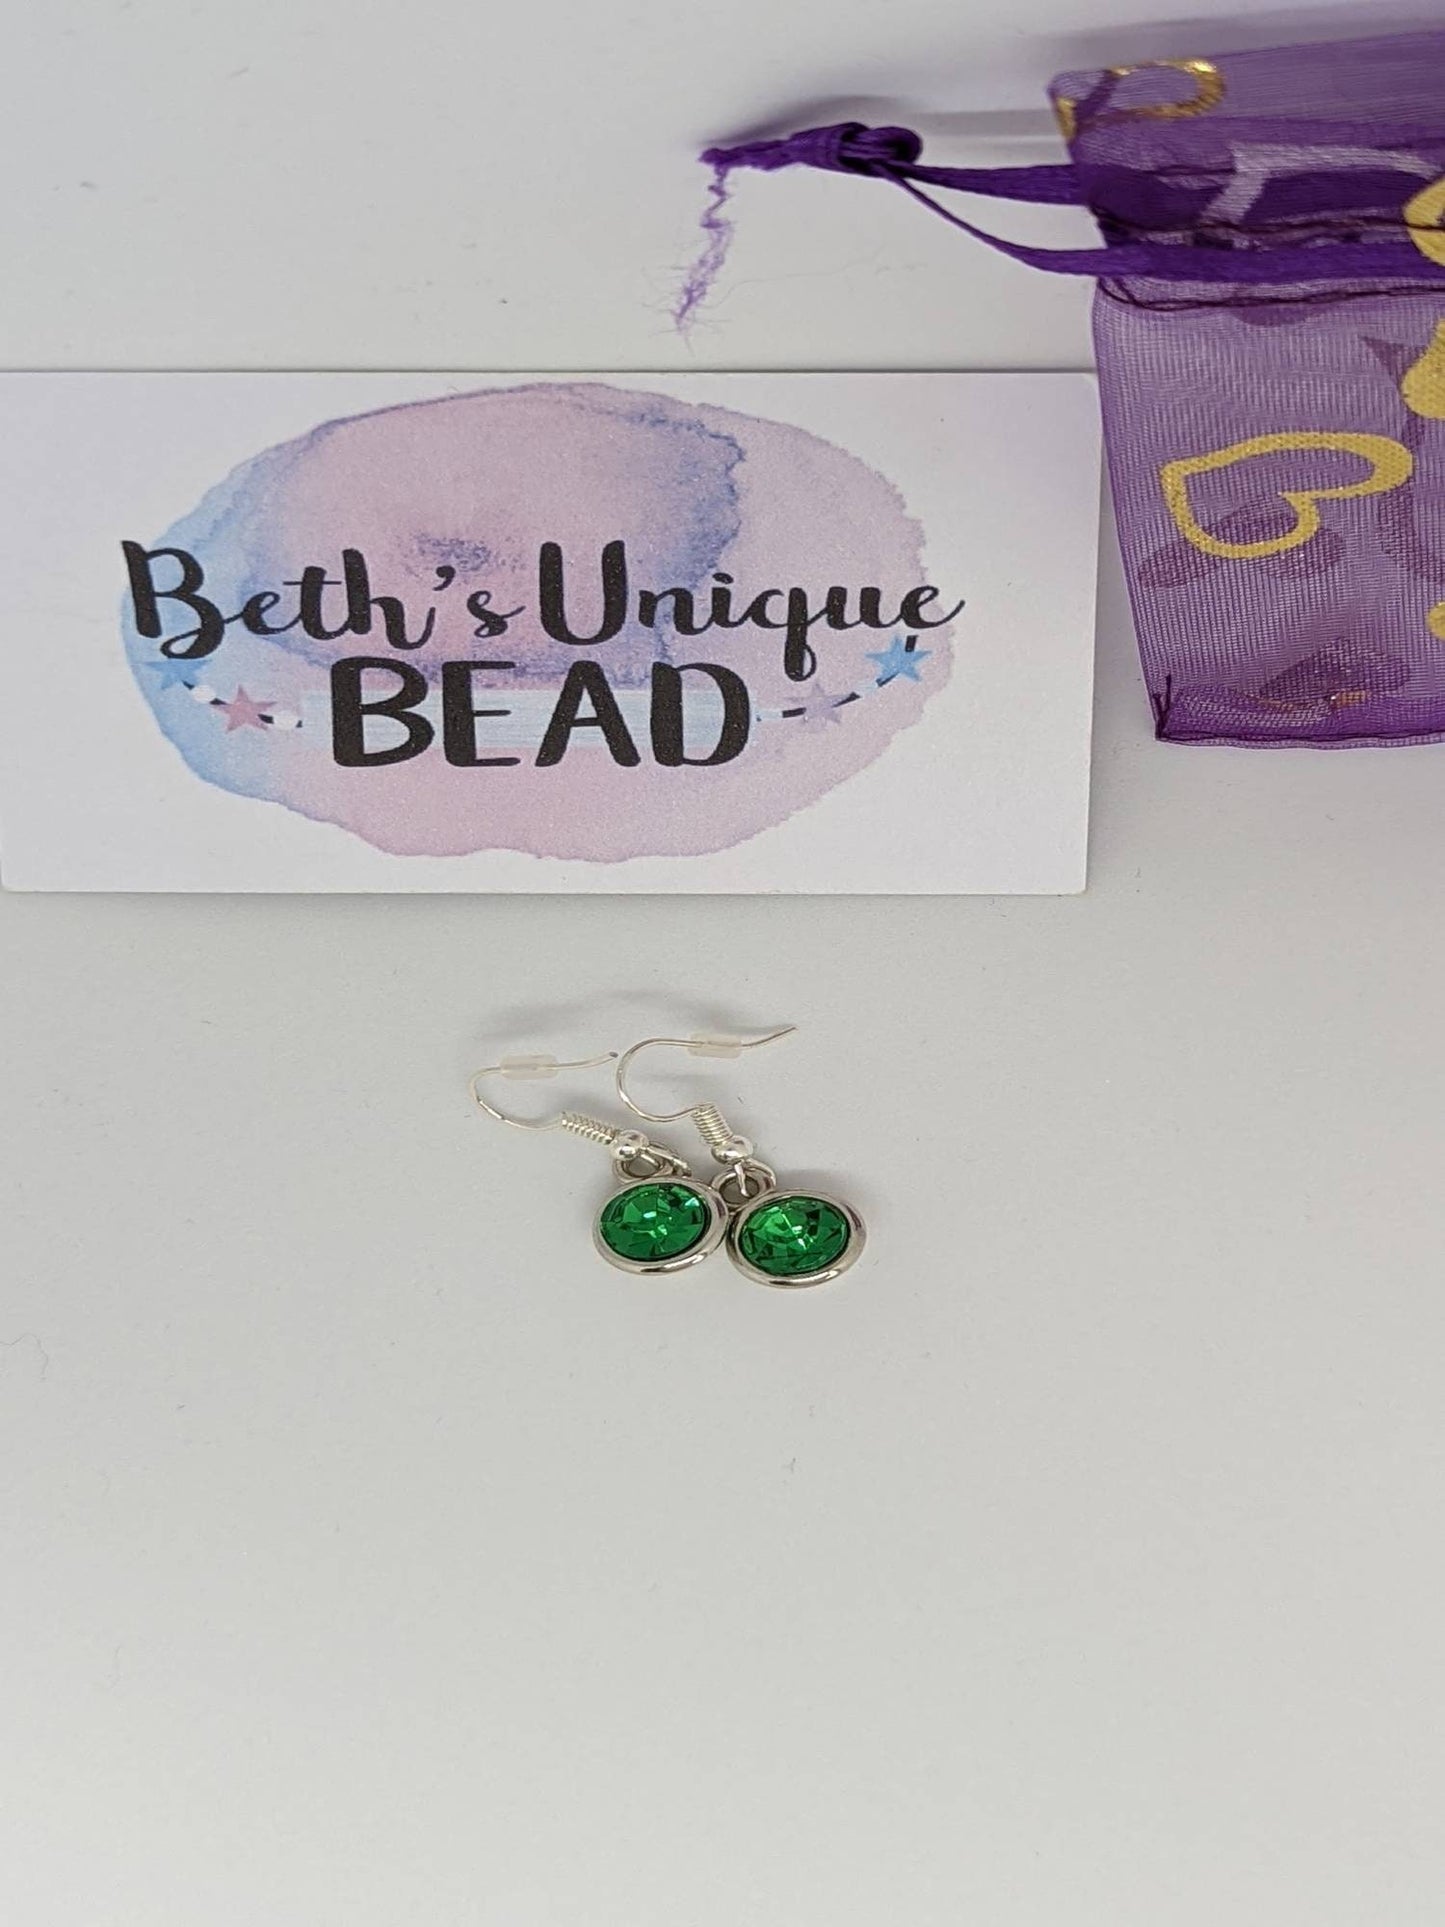 green circle earrings, sparkly earrings, silver plated jewellery, anniversary gift, circle jewellery